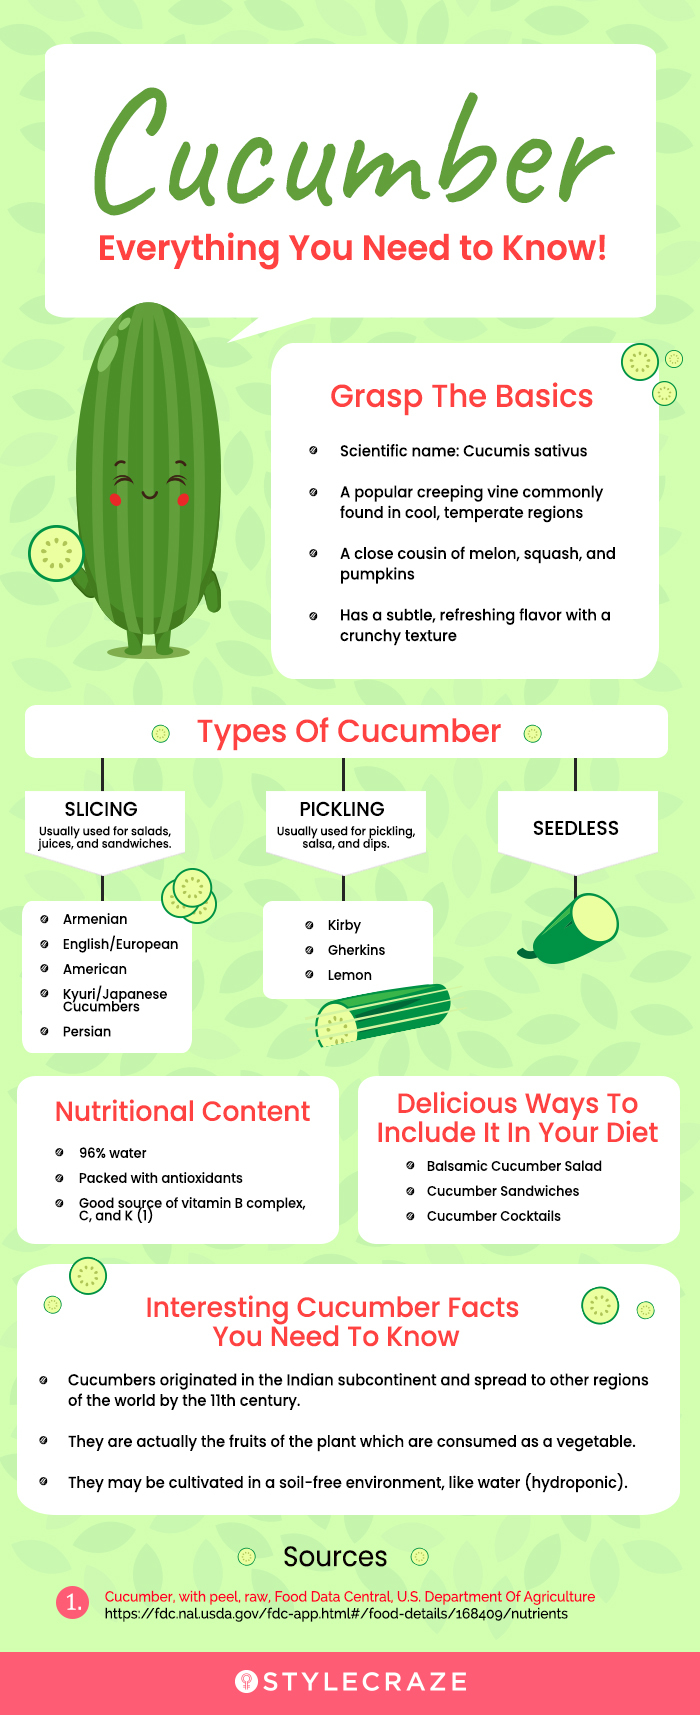 Buy Small Cucumber Water at Best Price in Pakistan - ChiltanPure